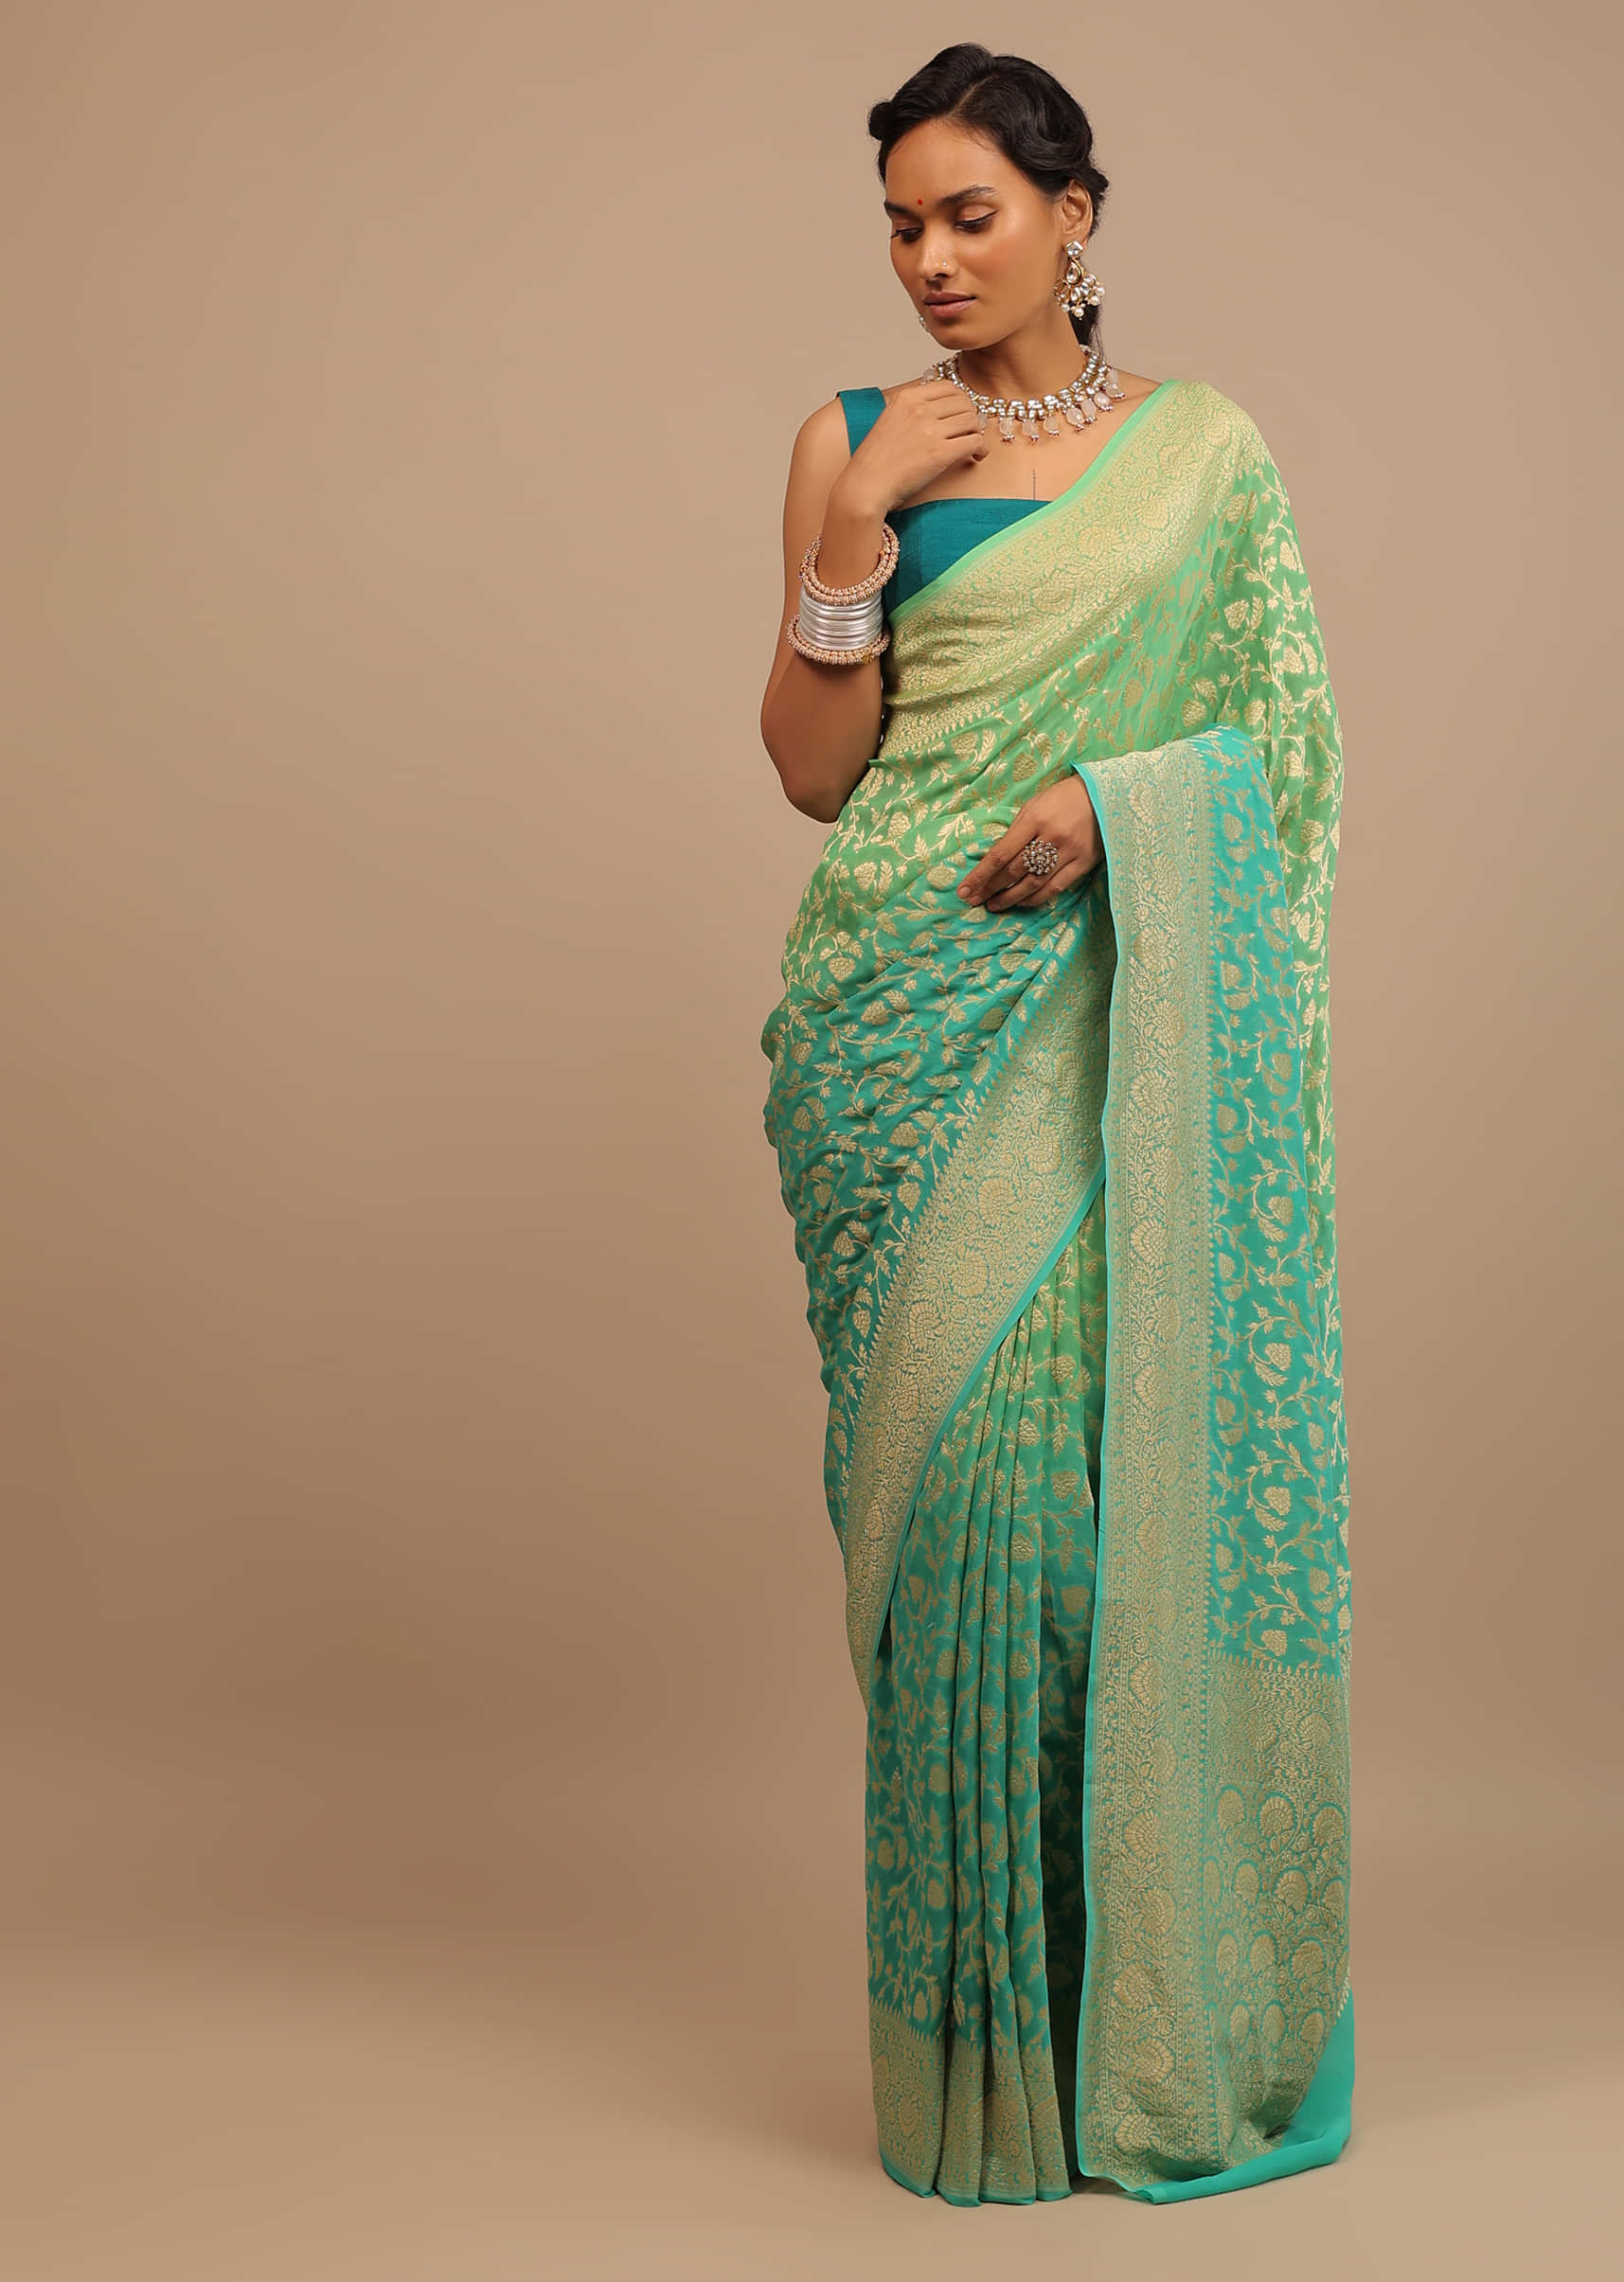 Pool Green Traditional Saree Made In Georgette And Beautified With Golden Jaal In A Floral Pattern